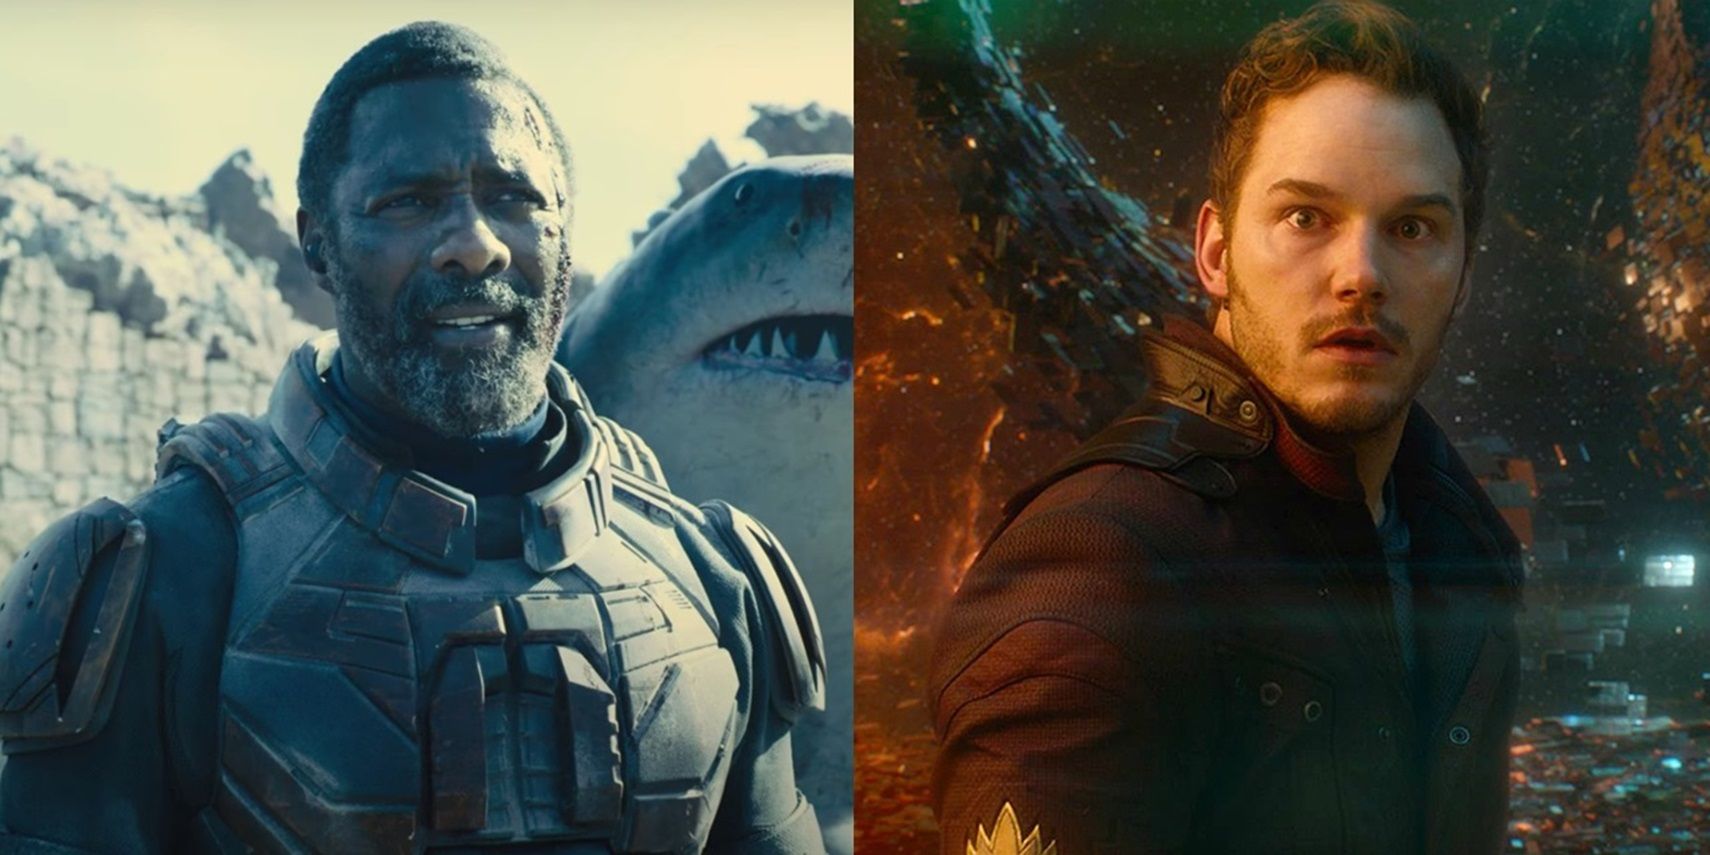 Idris Elba as Bloodsport in The Suicide Squad and Chris Pratt as Star-Lord in Guardians of the Galaxy